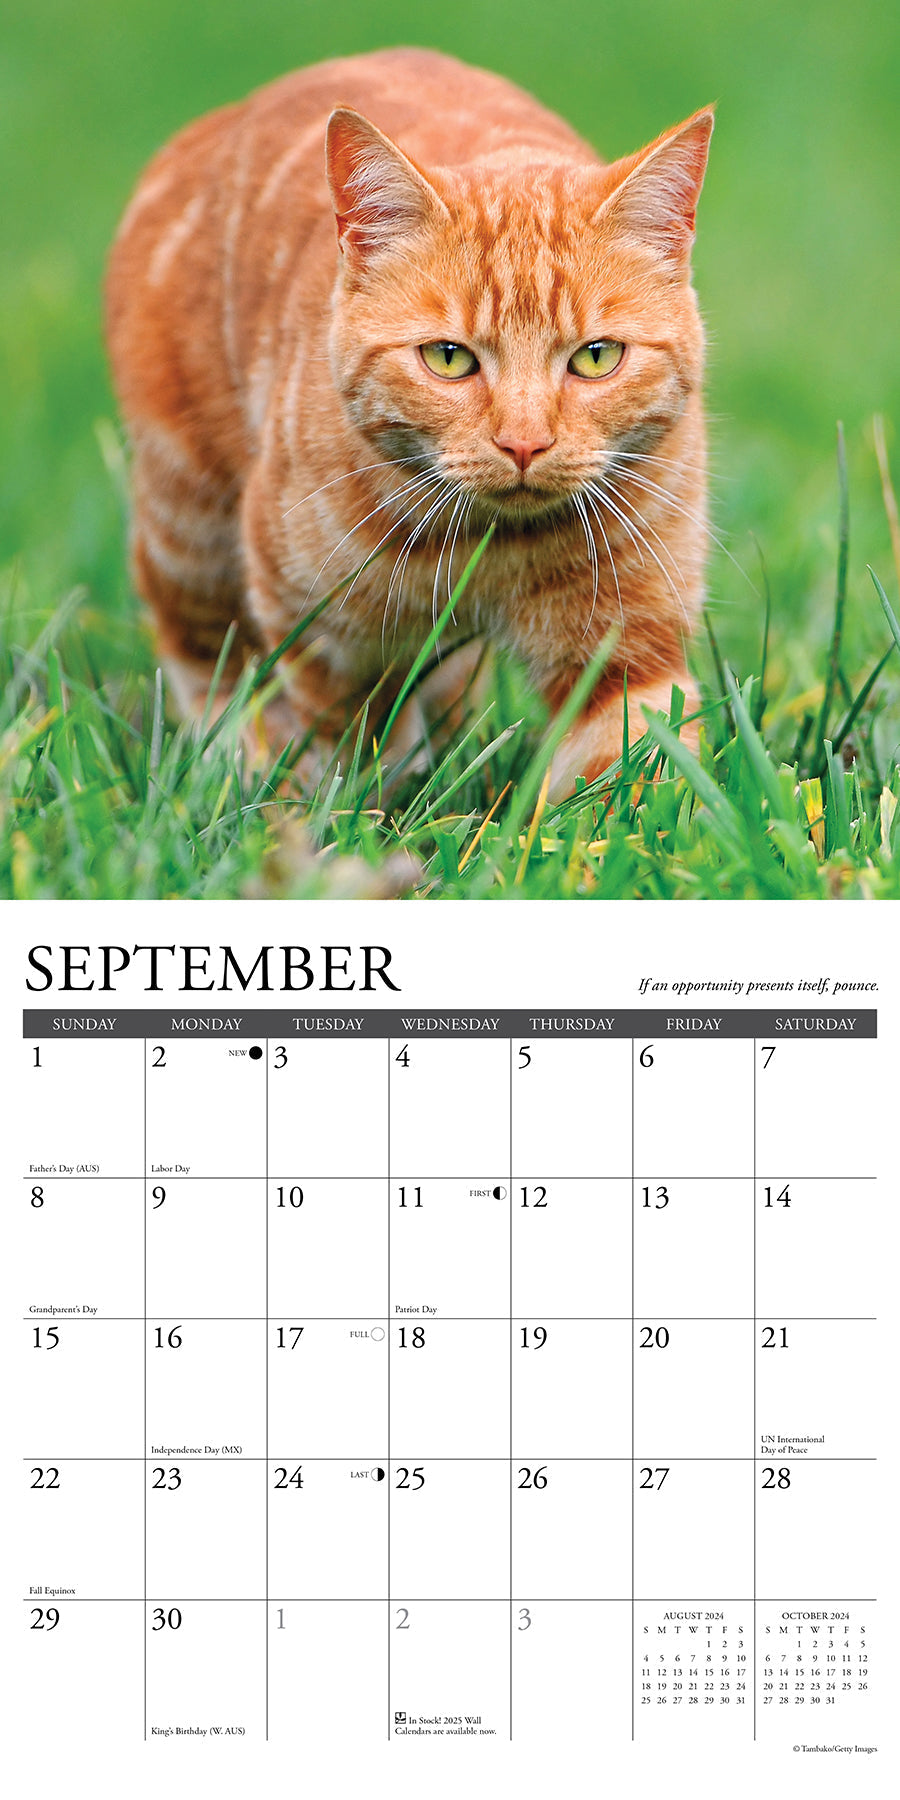 2024 What Cats Teach Us - Square Wall Calendar US